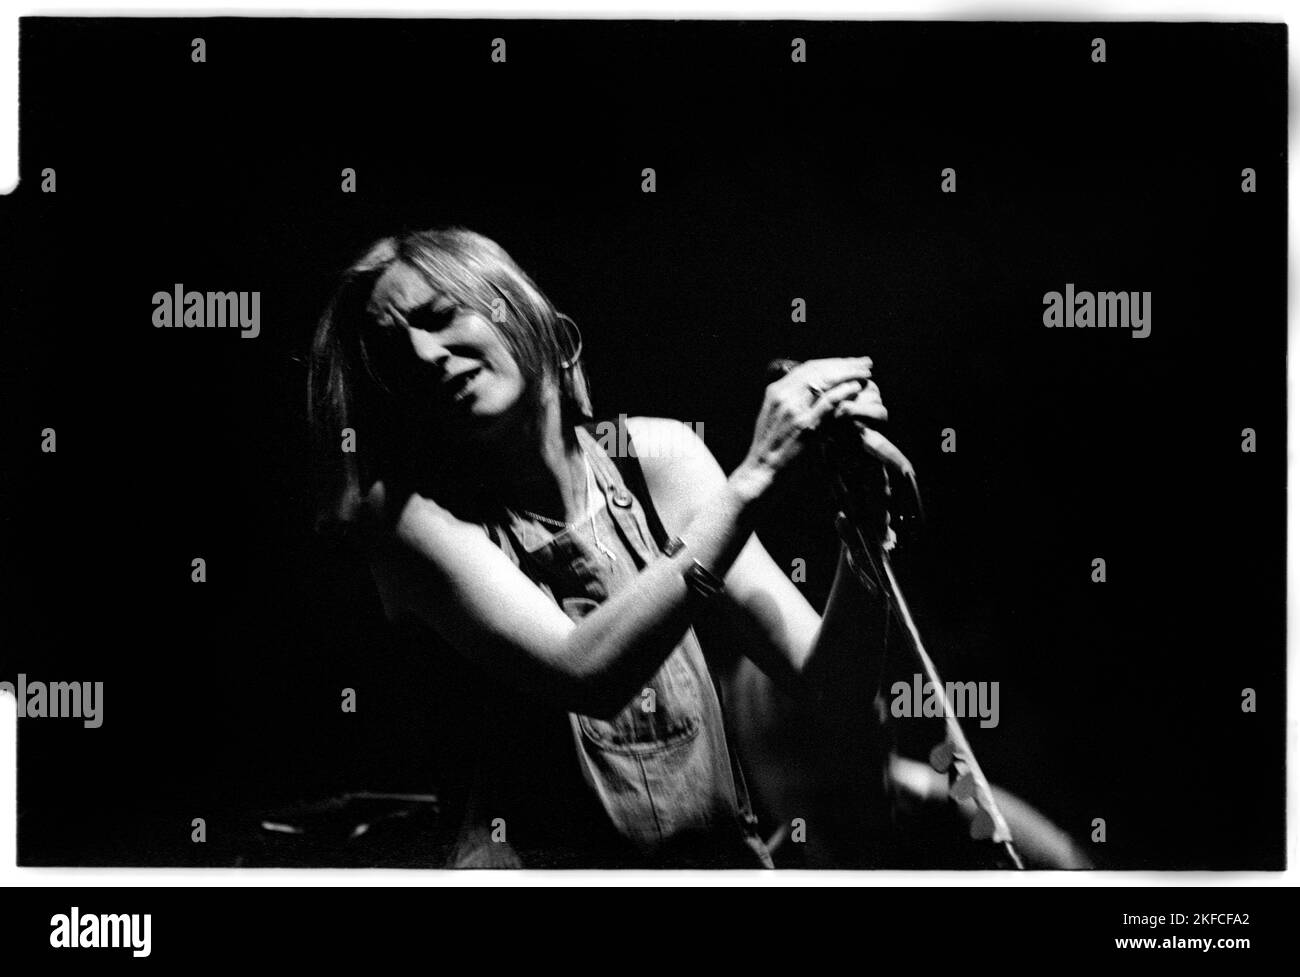 PORTISHEAD, GLASTONBURY FESTIVAL, 1995: Beth Gibbons of Portishead live on the Acoustic Stage at the Glastonbury Festival, England, June 24, 1995. This infamous performance went ahead in a massively overfull tent after a near riot that led to the previous act Evan Dando being bottled off stage. Photograph: Rob Watkins.   Portishead, a British trip-hop band formed in 1991, redefined electronic music with their dark, atmospheric sound. Albums like 'Dummy' and 'Portishead' showcased their haunting melodies and Beth Gibbons' emotive vocals, cementing their status as pioneers of the genre. Stock Photo